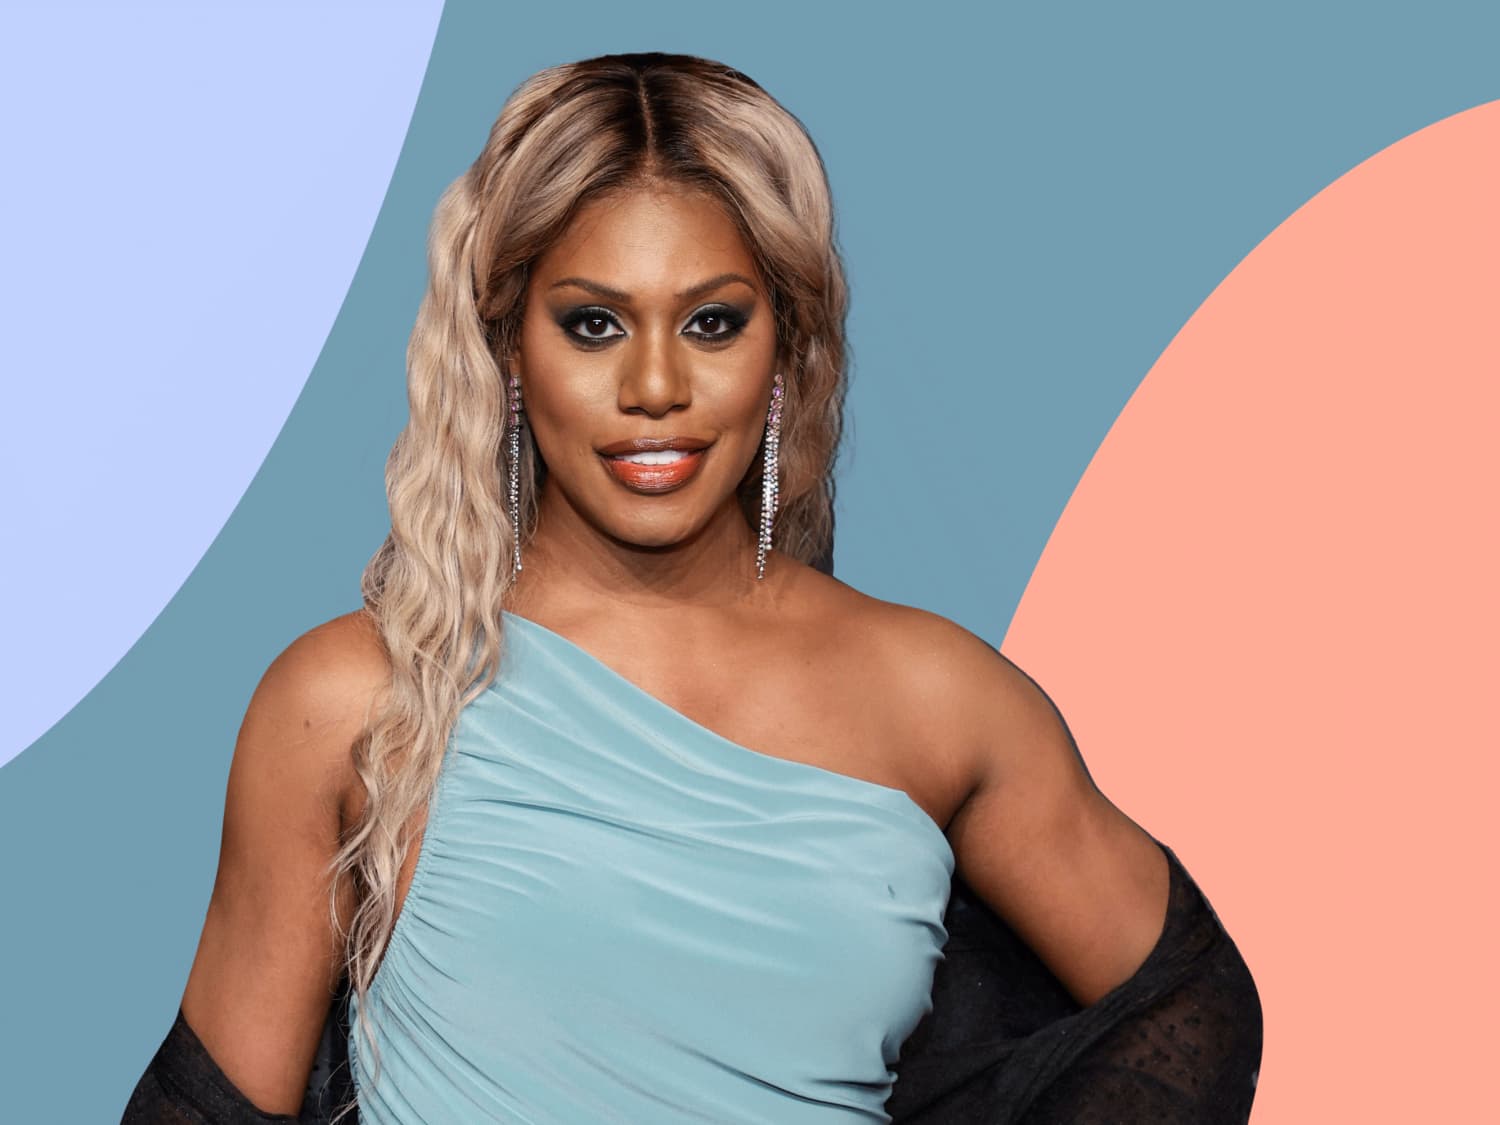 Laverne Cox's 634 Square-Foot NYC Studio Has So Many Space-Saving